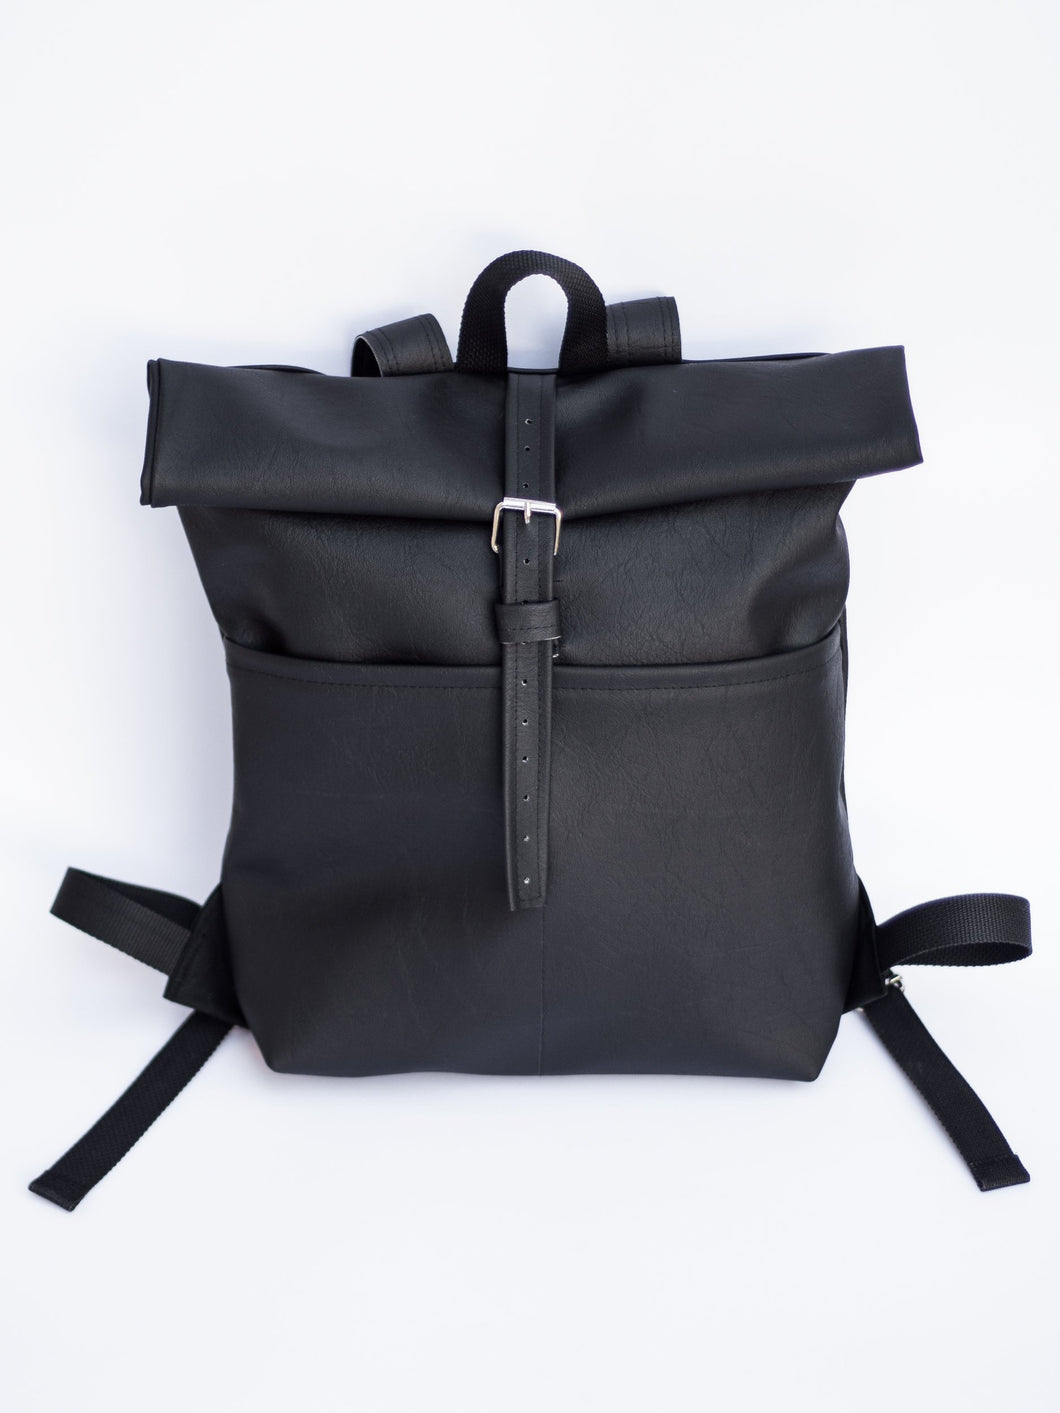 AW1807 backpack